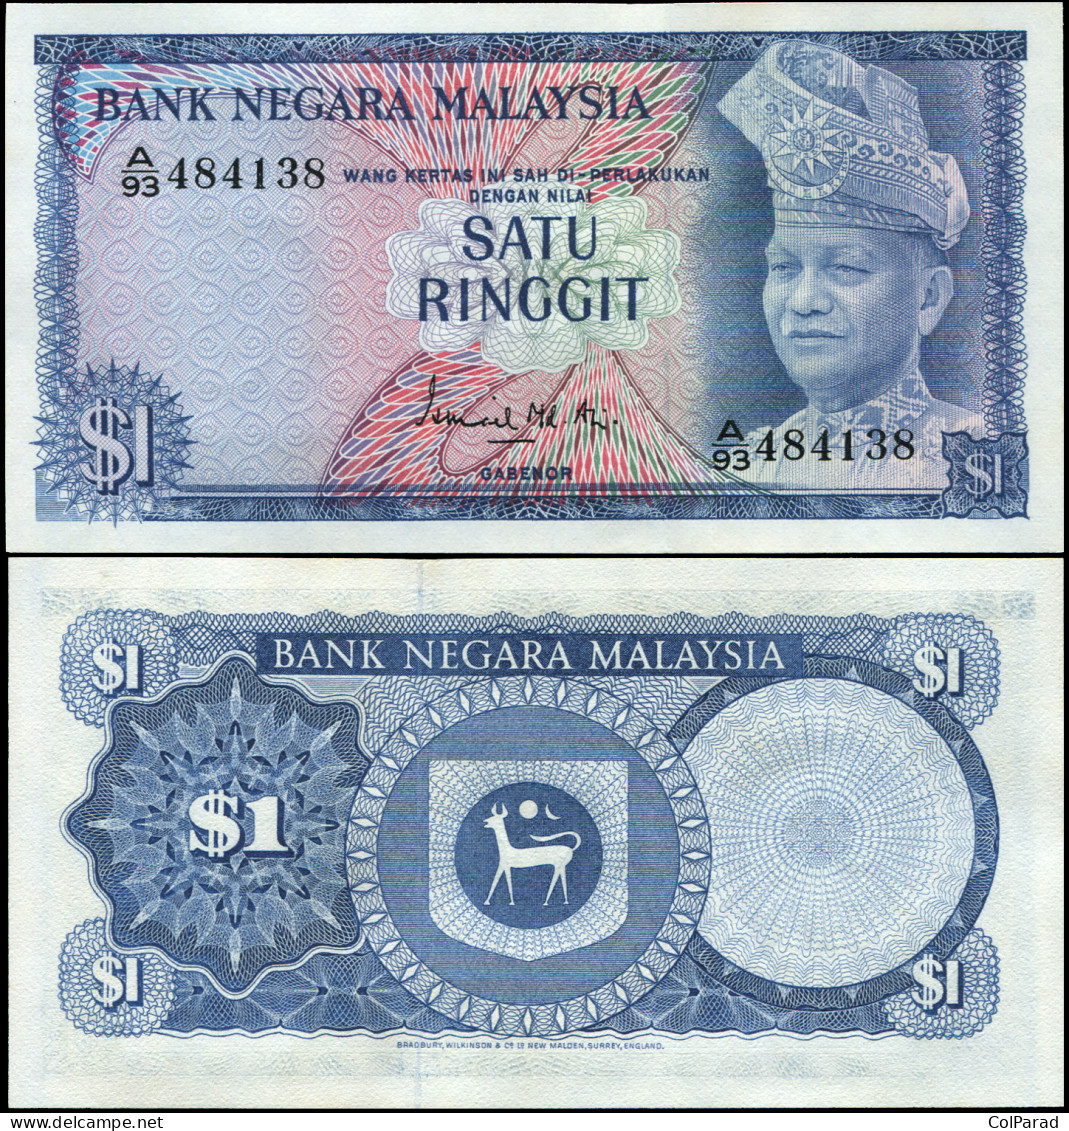 MALAYSIA 1 RINGGIT - ND (1967) - Paper Unc - P.1a Banknote - Malaysie